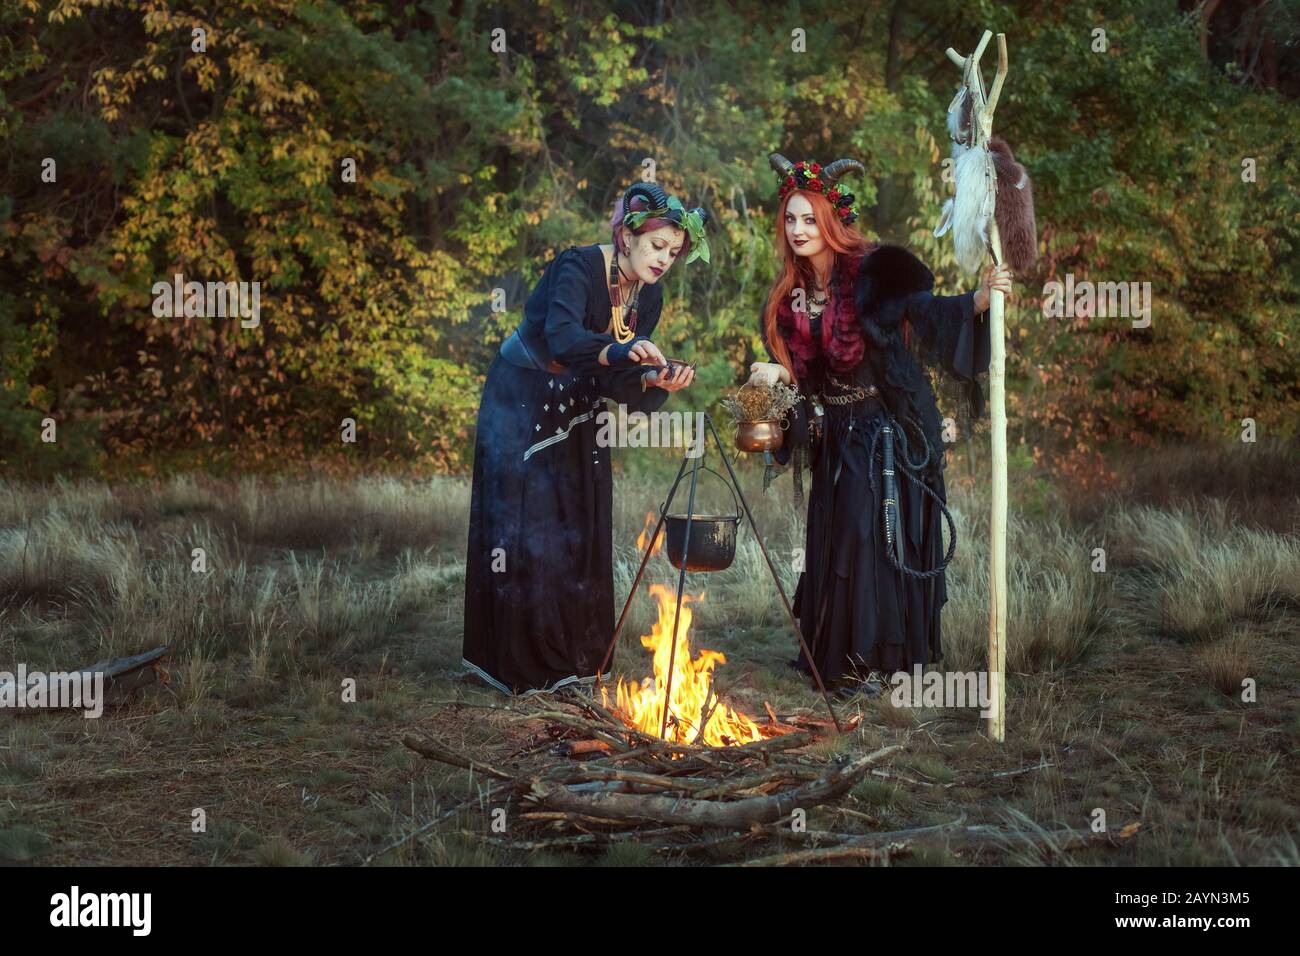 Two women shamans make a potion on a bonfire in the forest. Stock Photo